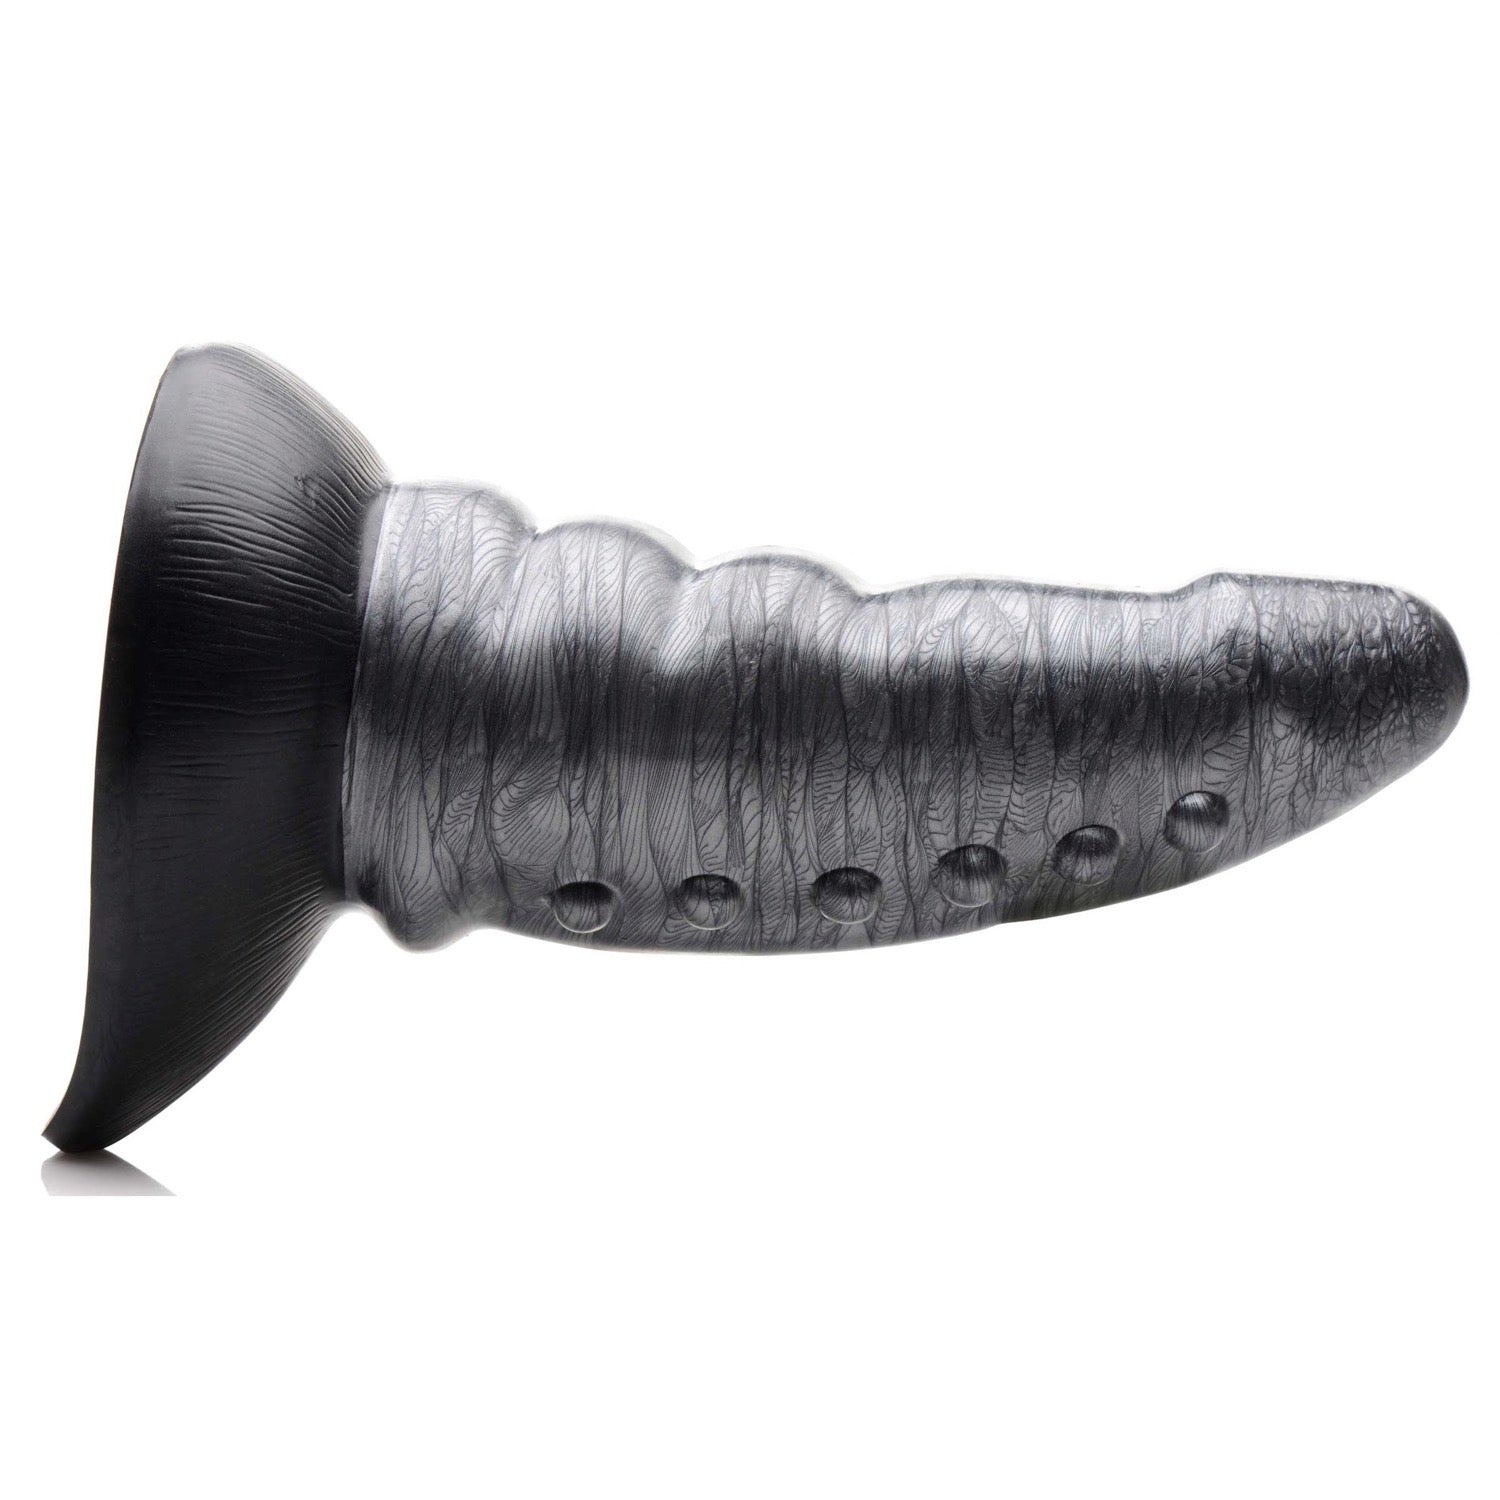 Creature Cocks Beastly Tapered Bumpy Silicone 8.3&quot; Dildo by XR Brands